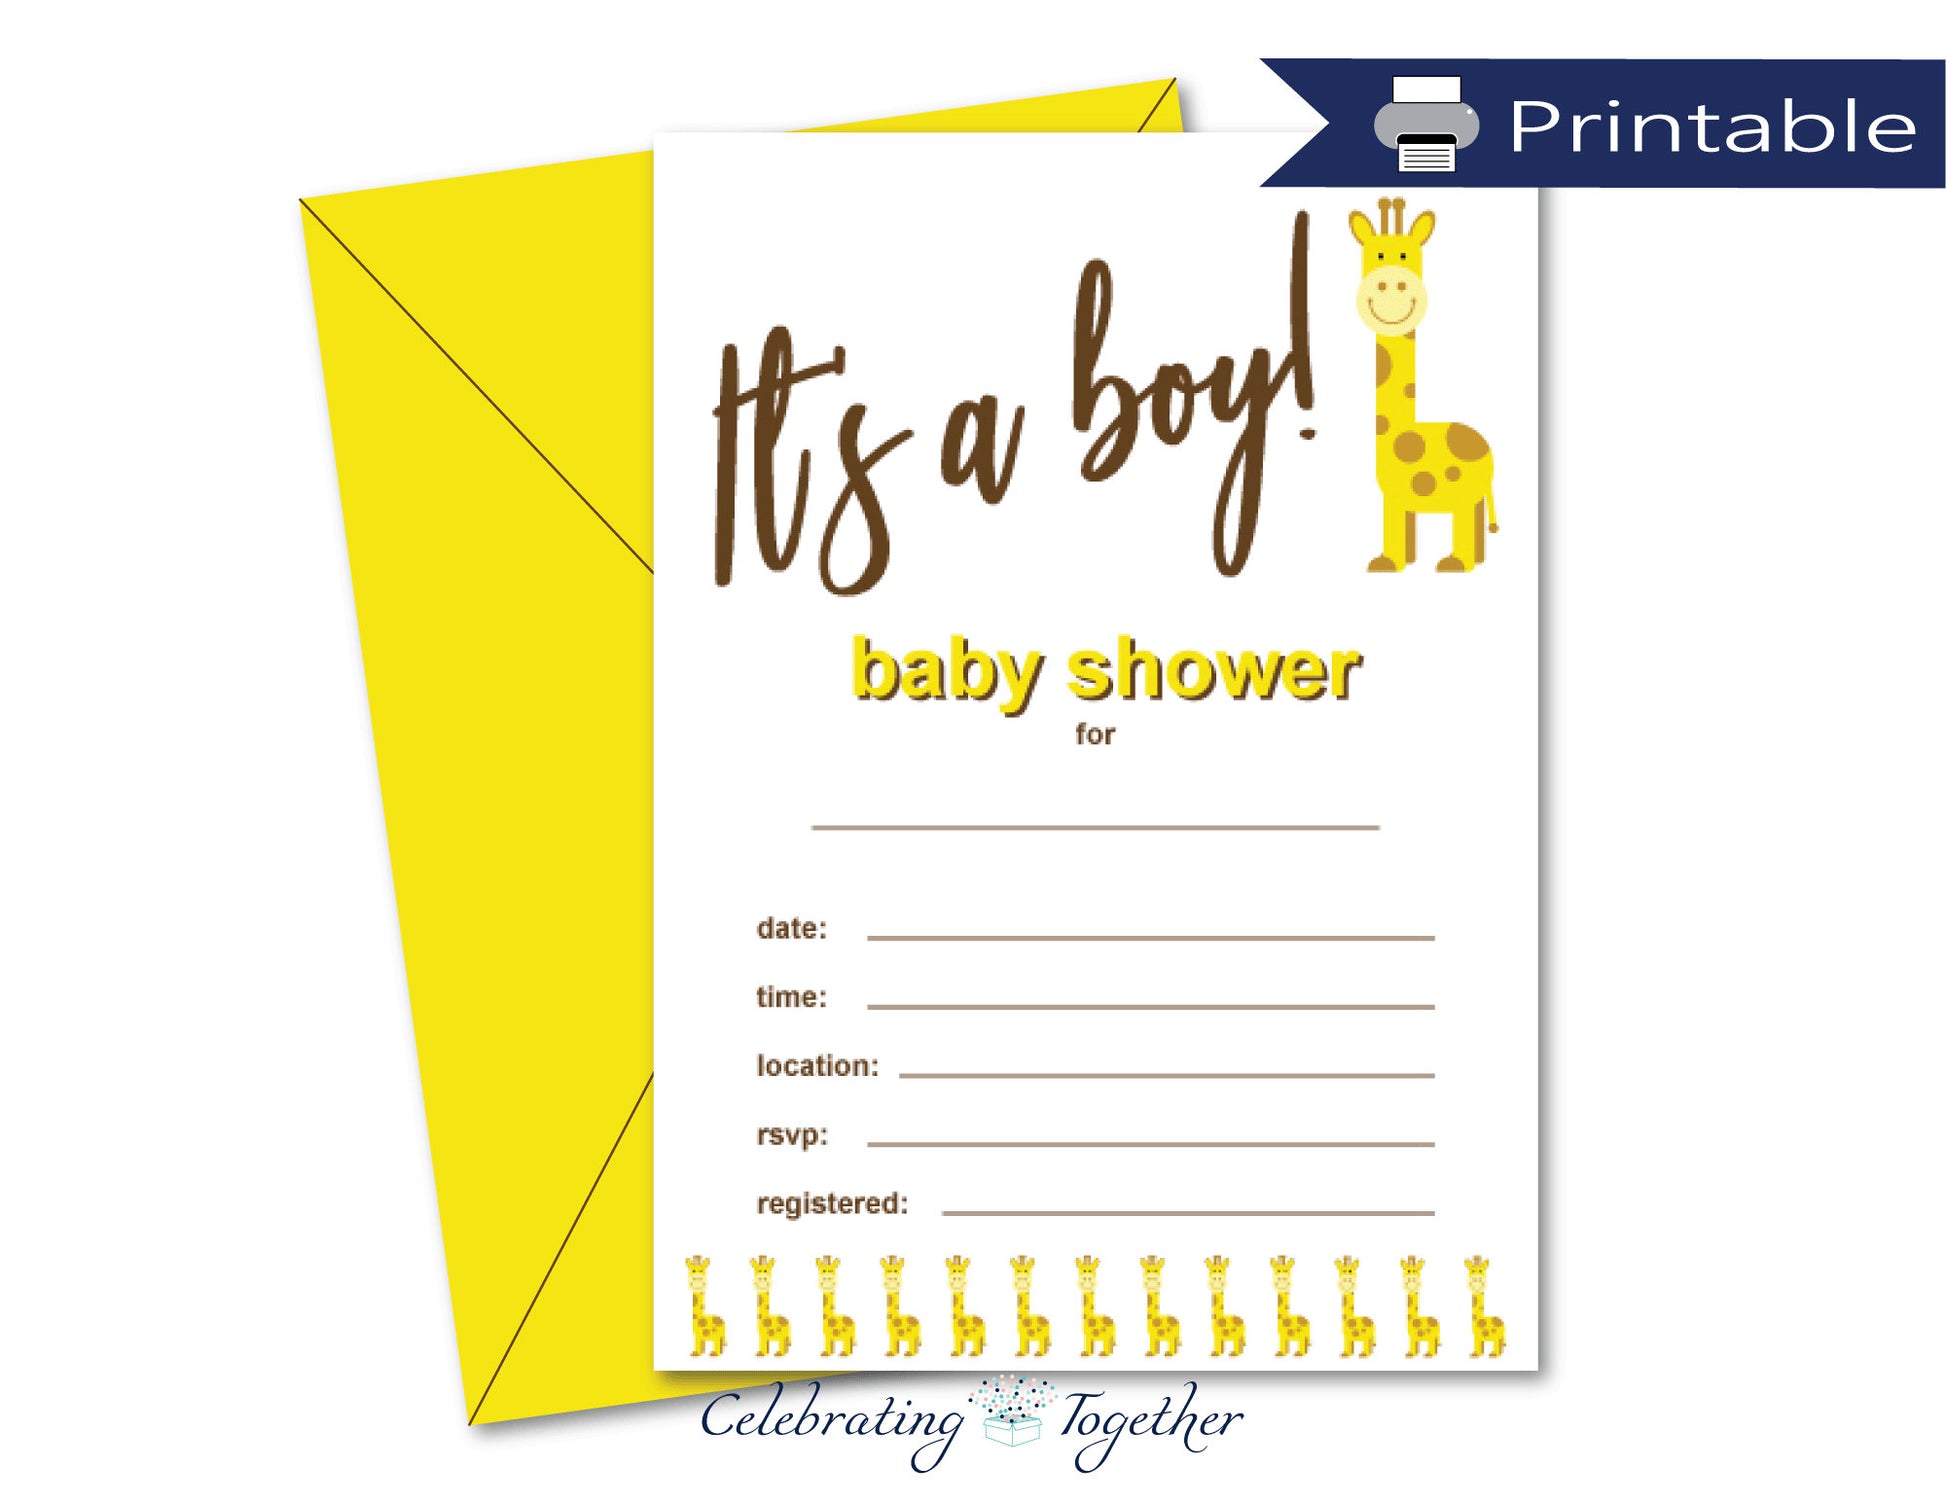 instant download its a boy baby shower invitations - Celebrating Together